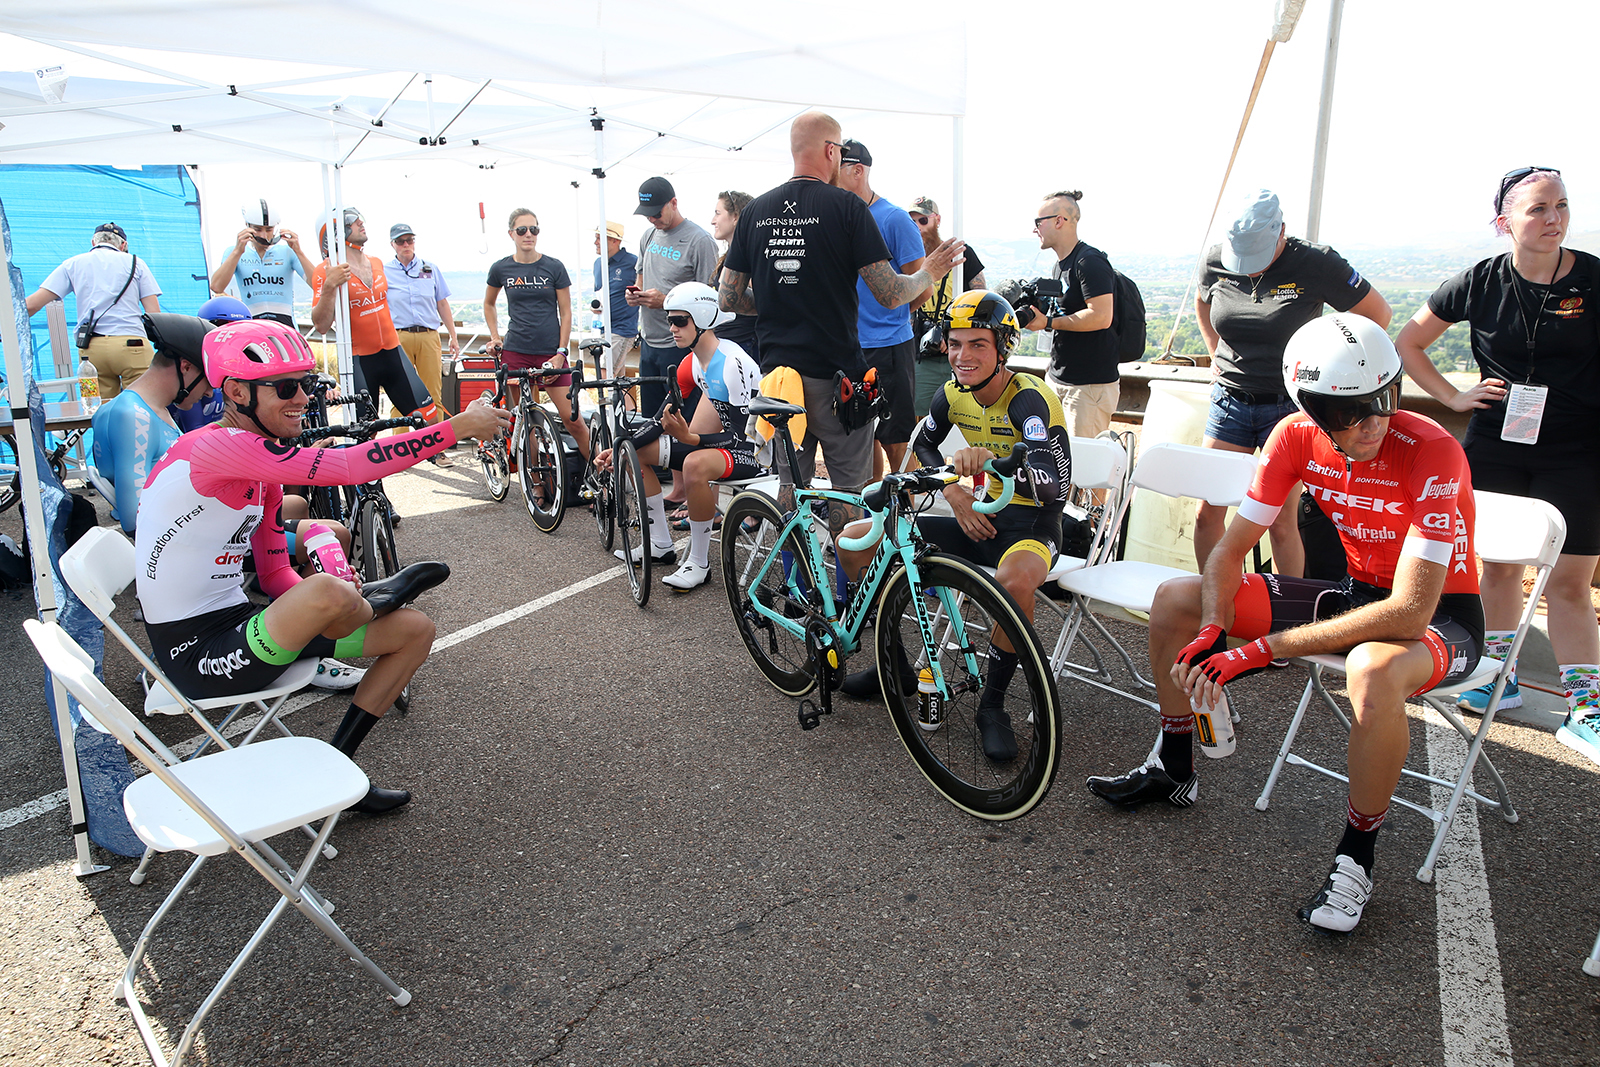 Start house banter. 2018 Tour of Utah Team Prologue, August 6, 2018, St. George, Utah. Photo by Cathy Fegan-Kim, cottonsoxphotography.net